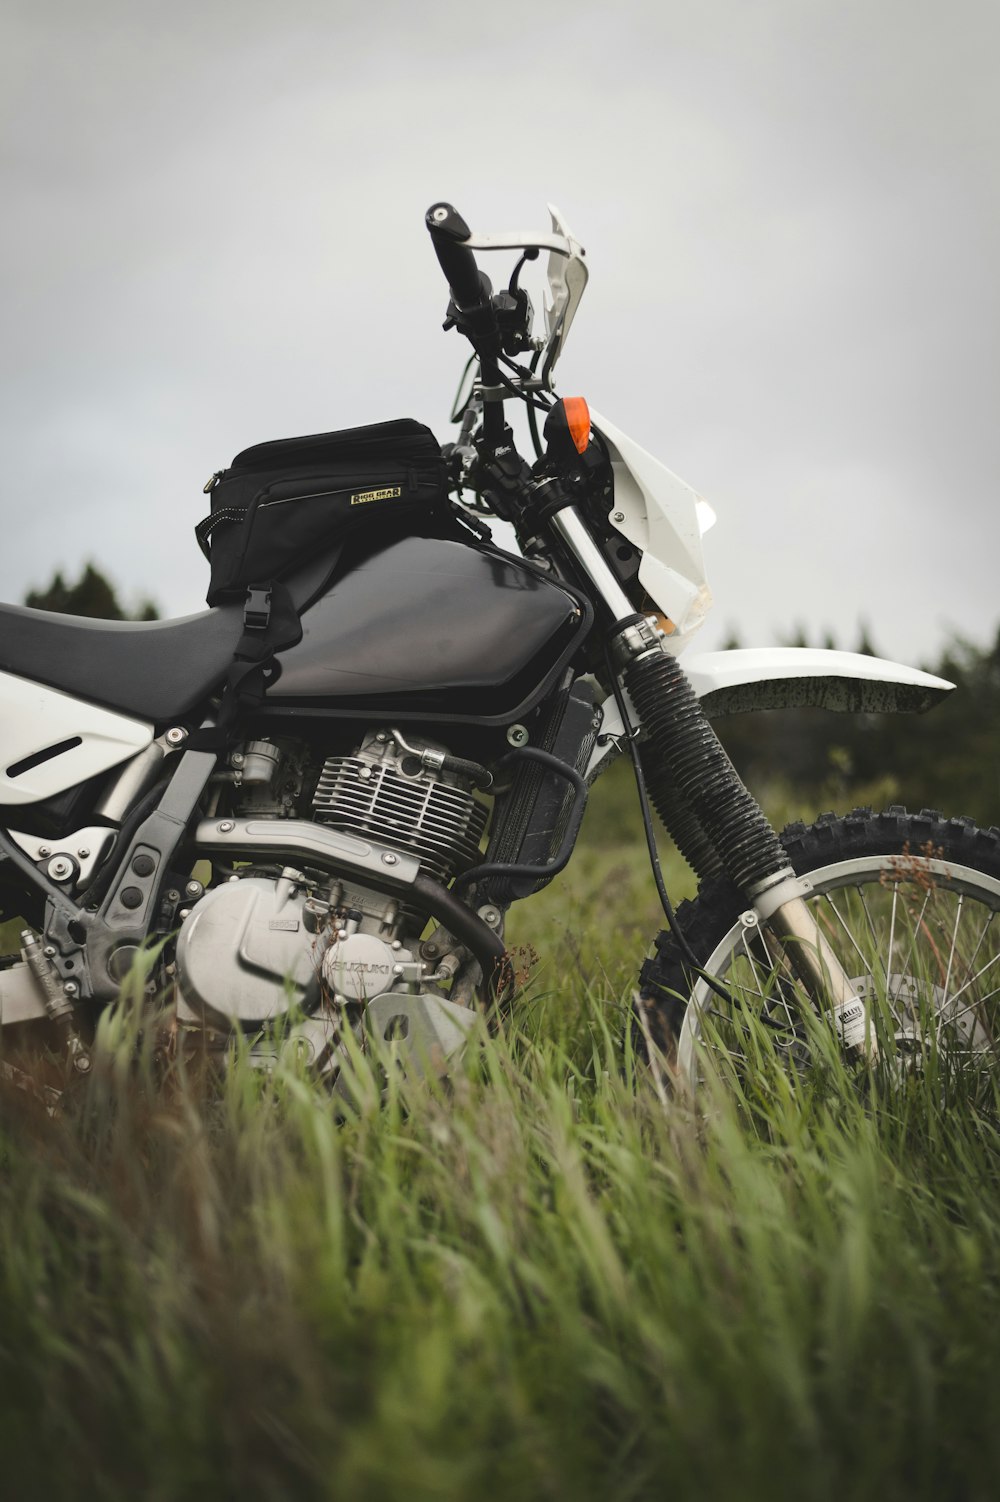 black and white motorcycle on green grass field